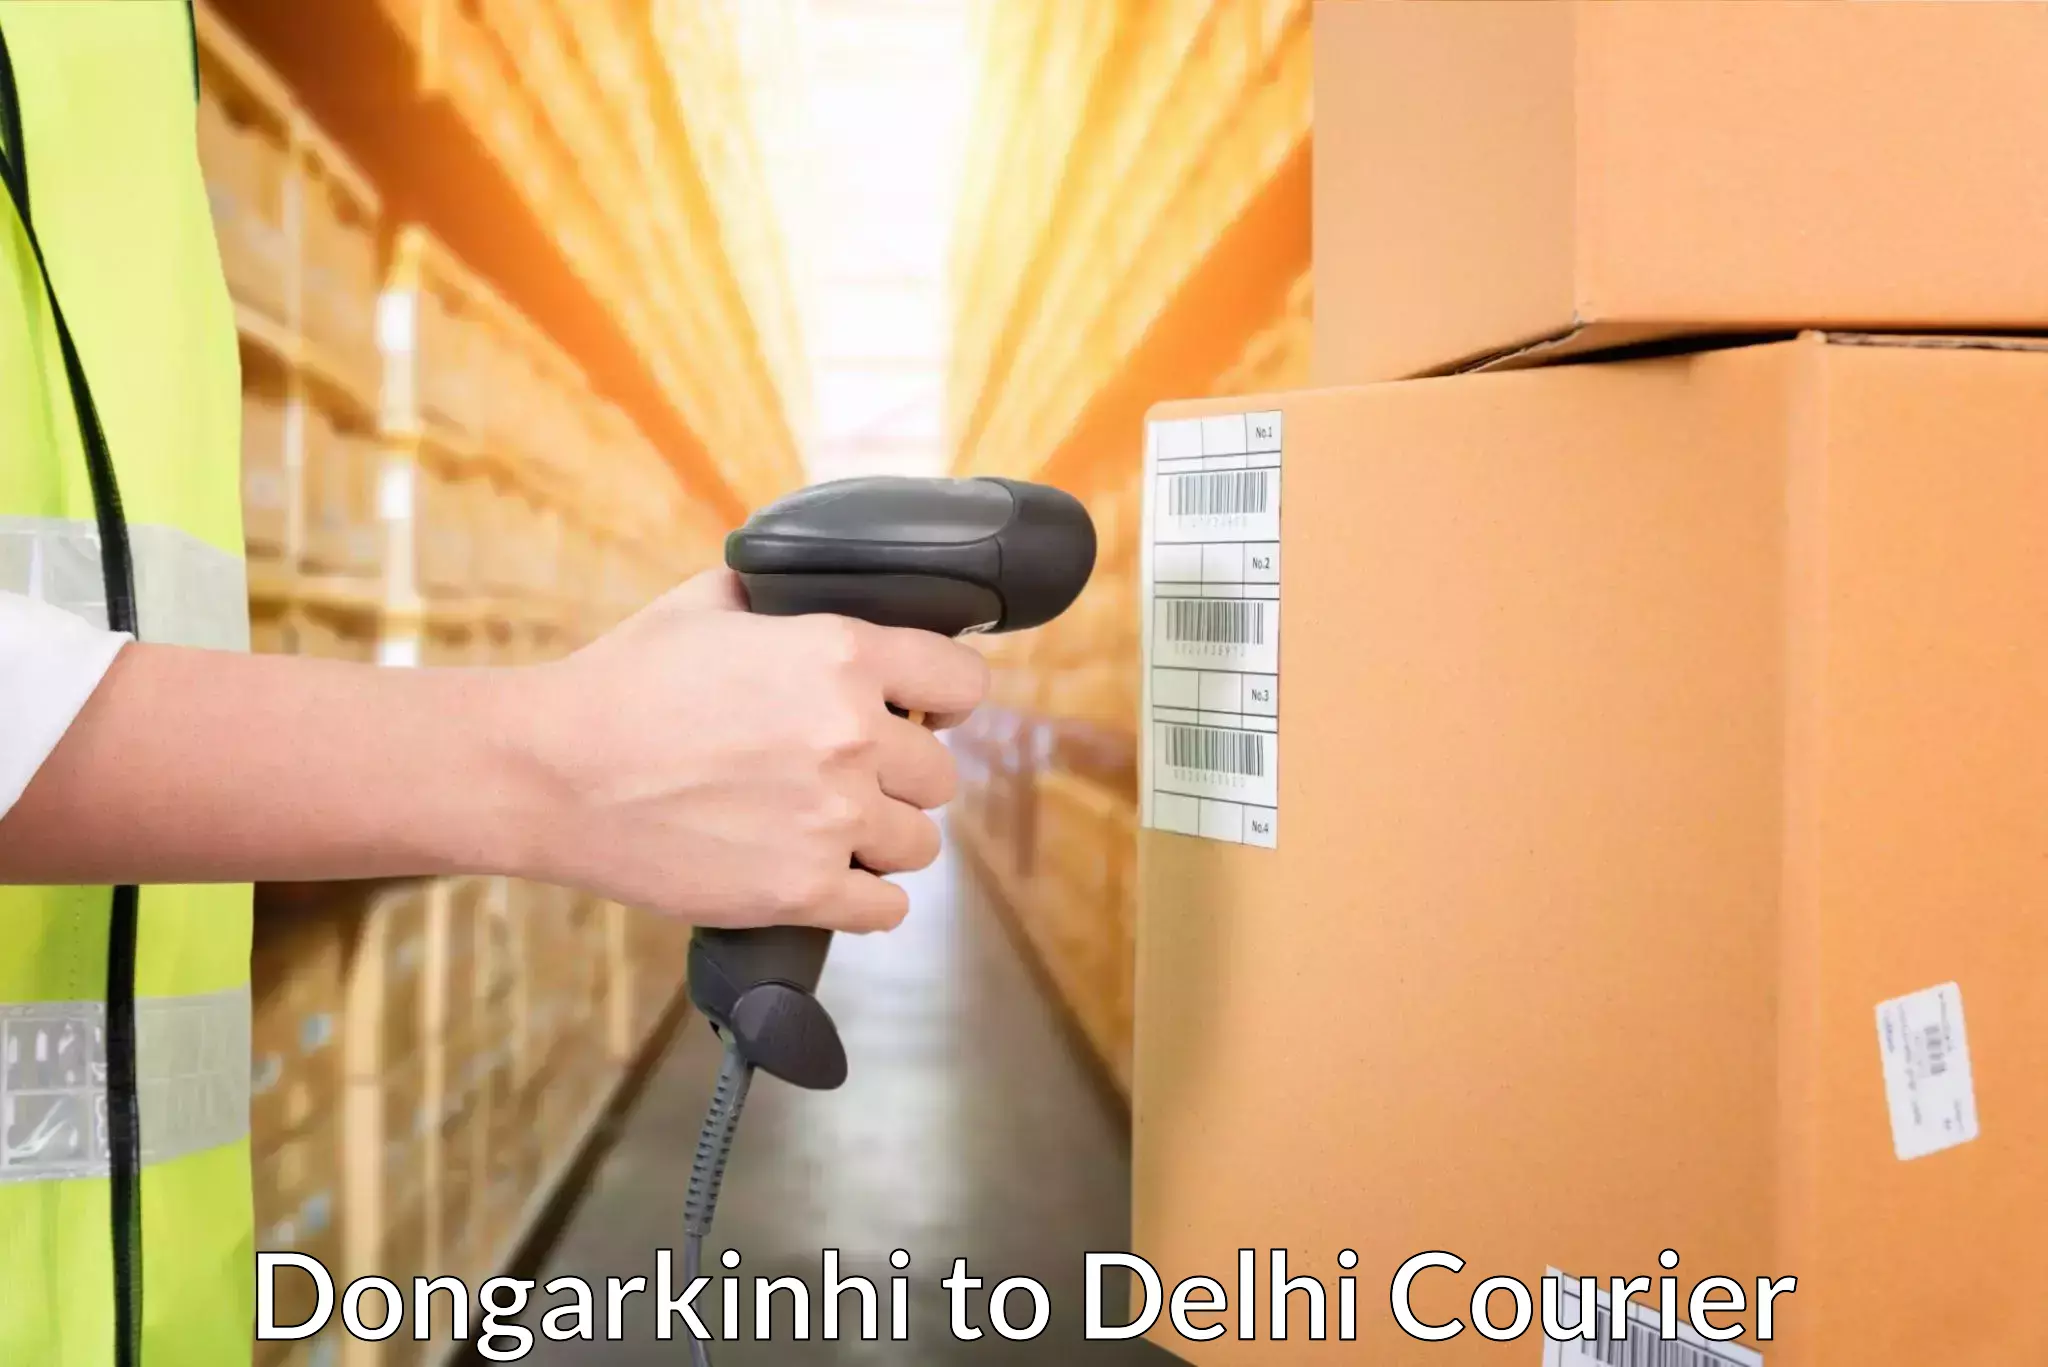 Overnight delivery services Dongarkinhi to Indraprastha